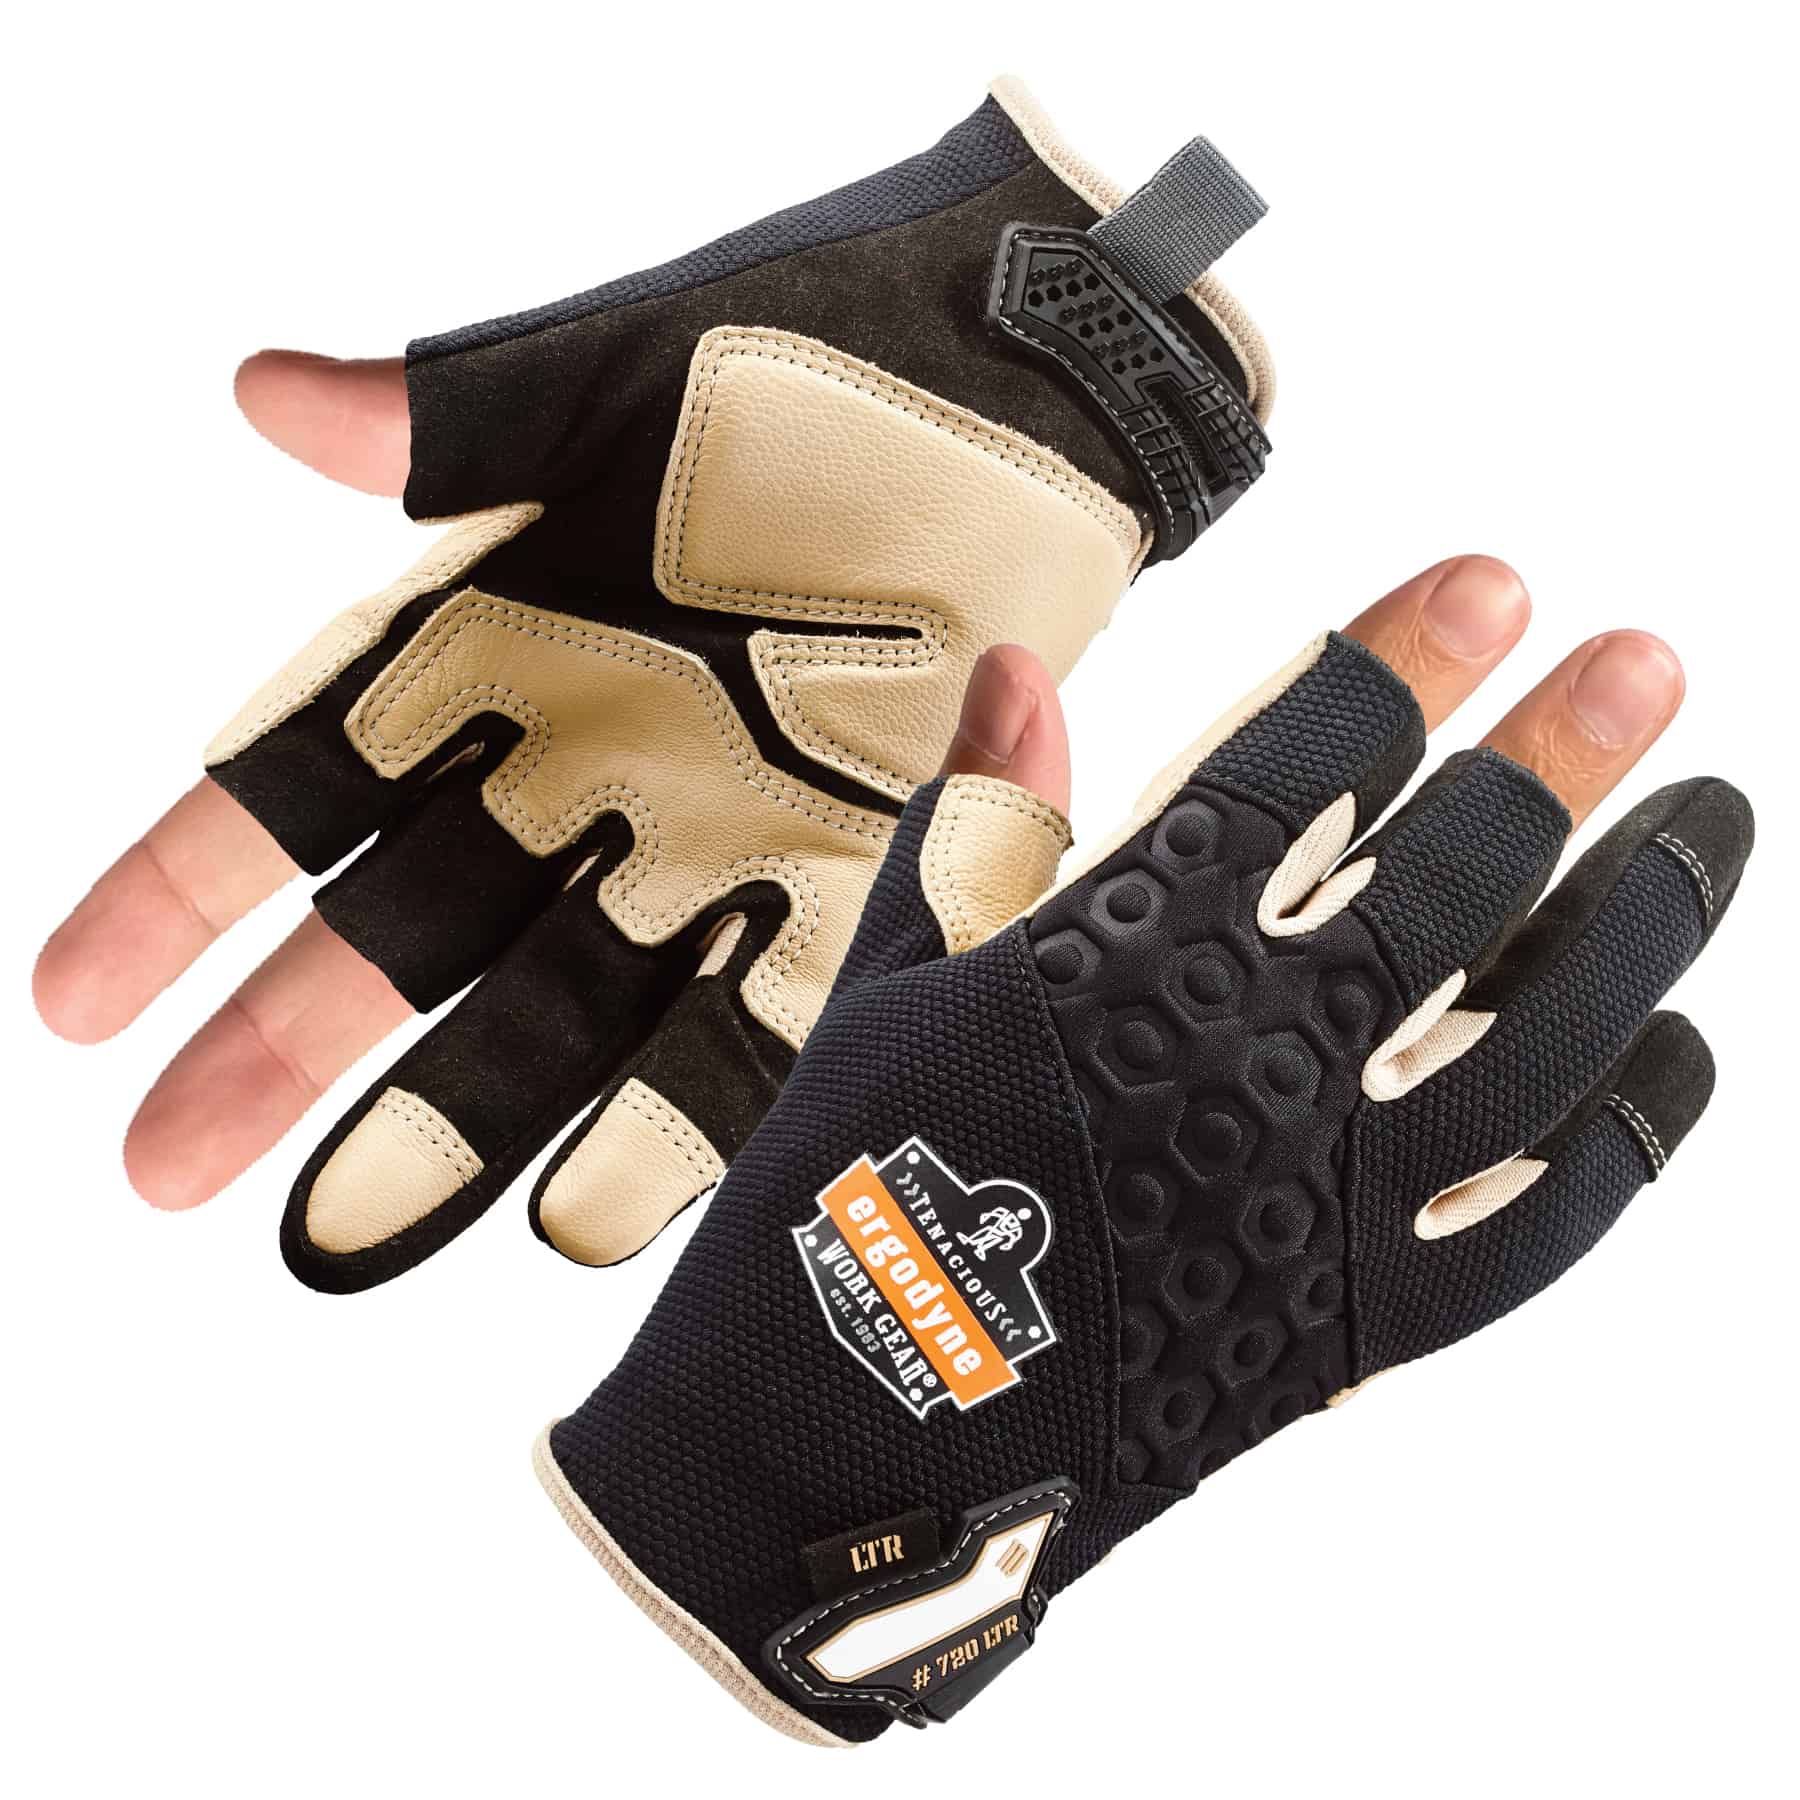 GHOST™ Series Cut Protection Level 2 Work Glove - Gloves - Apparel